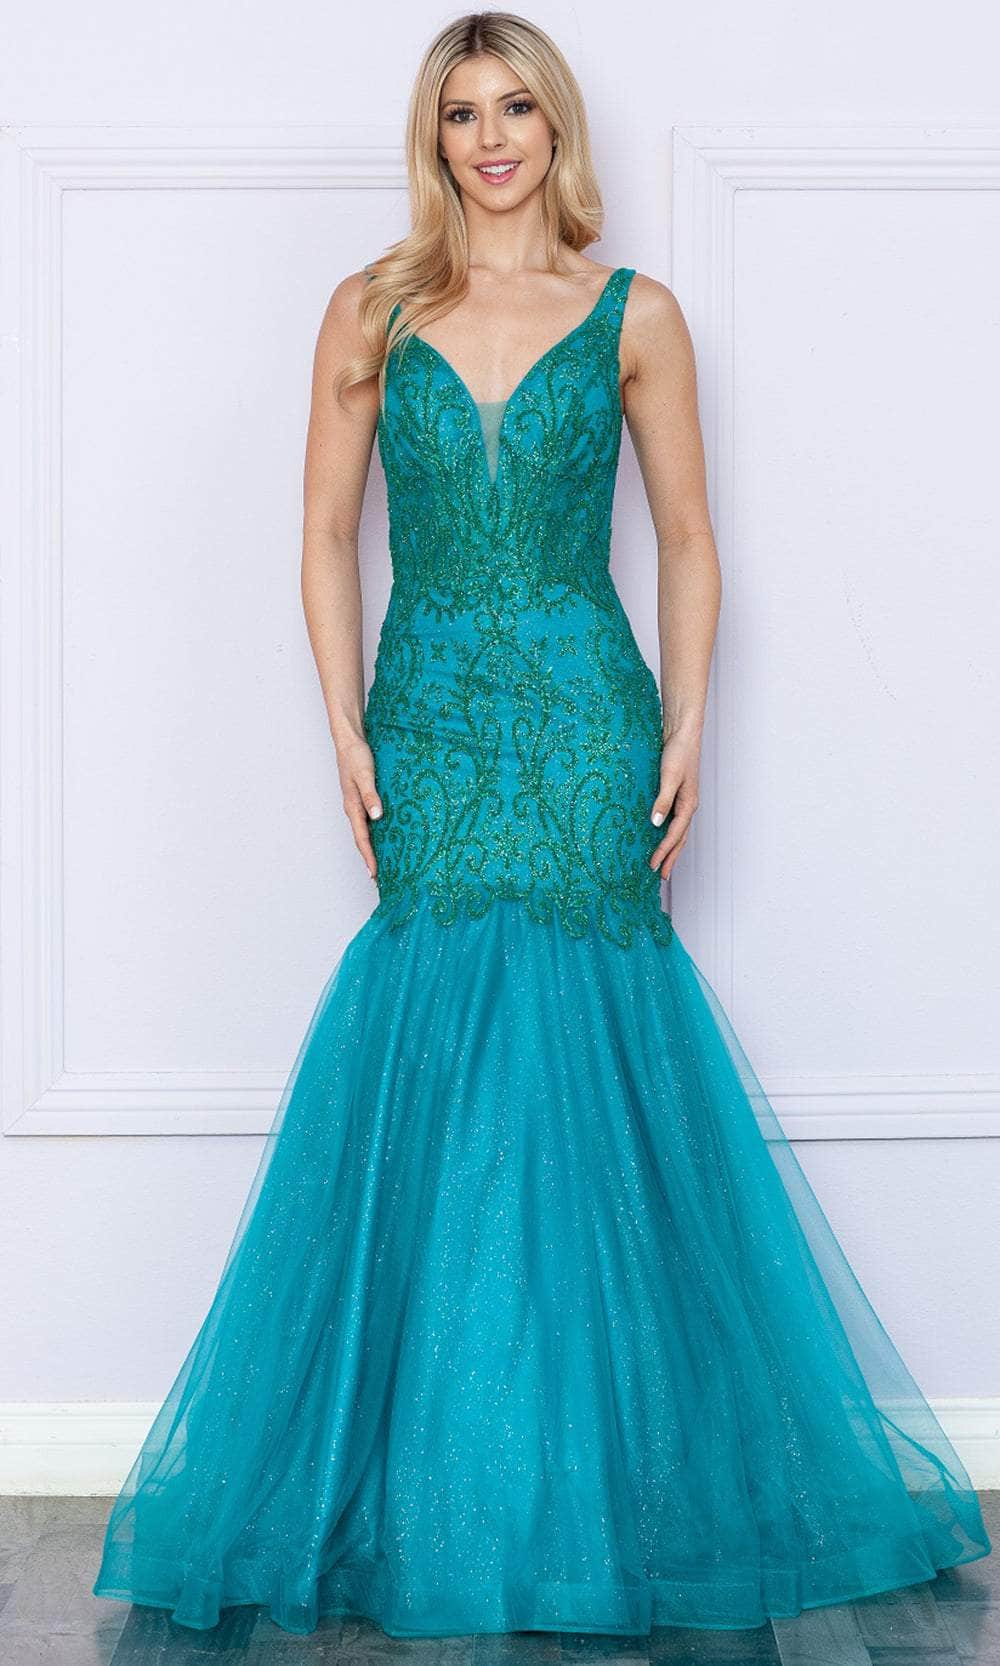 Poly USA 9388 - Plunging Neckline Glitter Prom Dress Prom Dresses XS / Teal